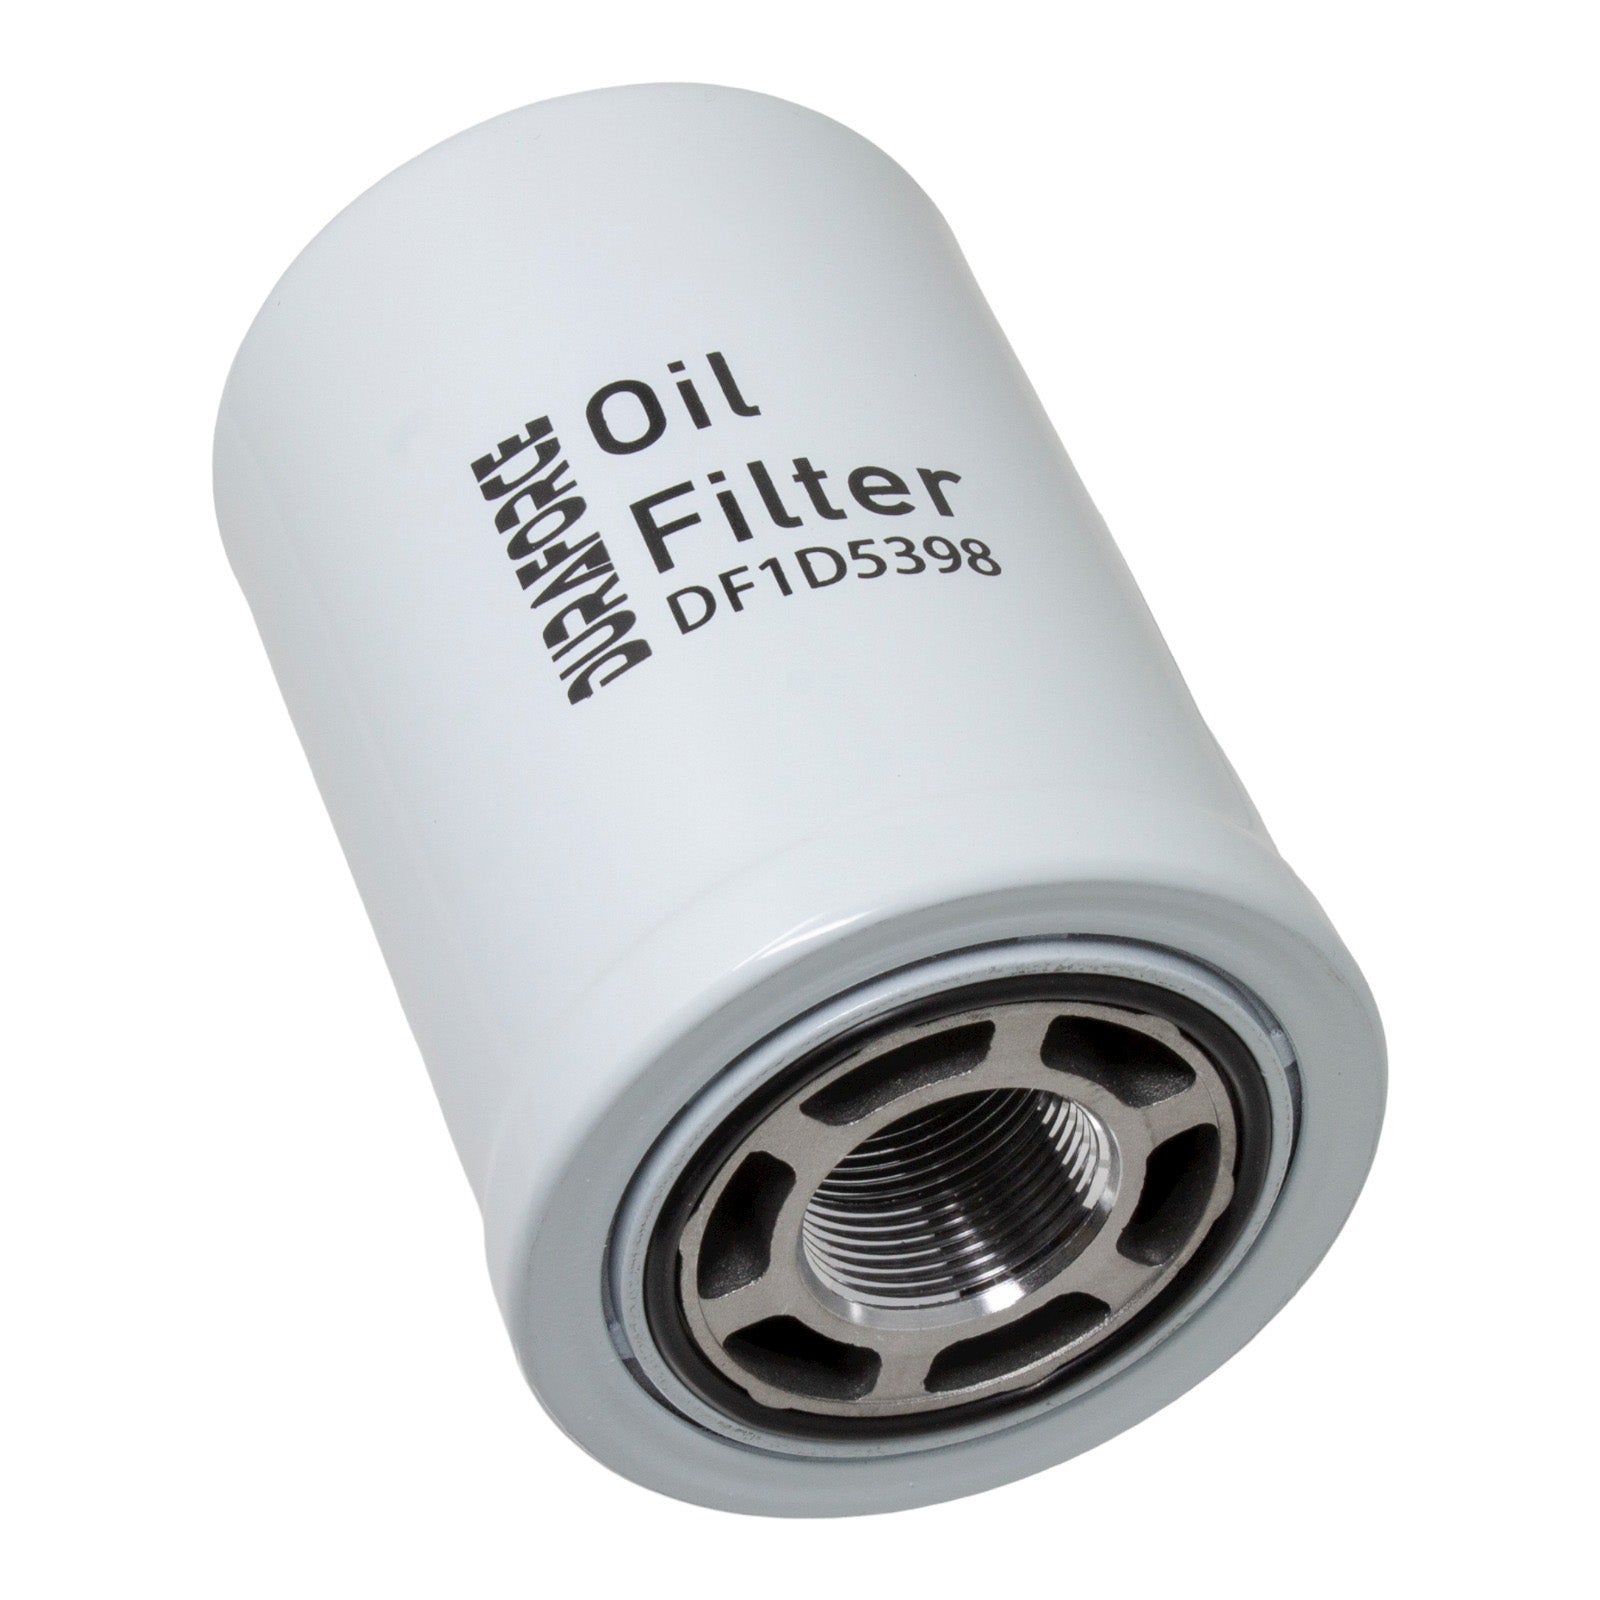 6599543, Hydraulic Oil Filter For Bobcat at Duraforce